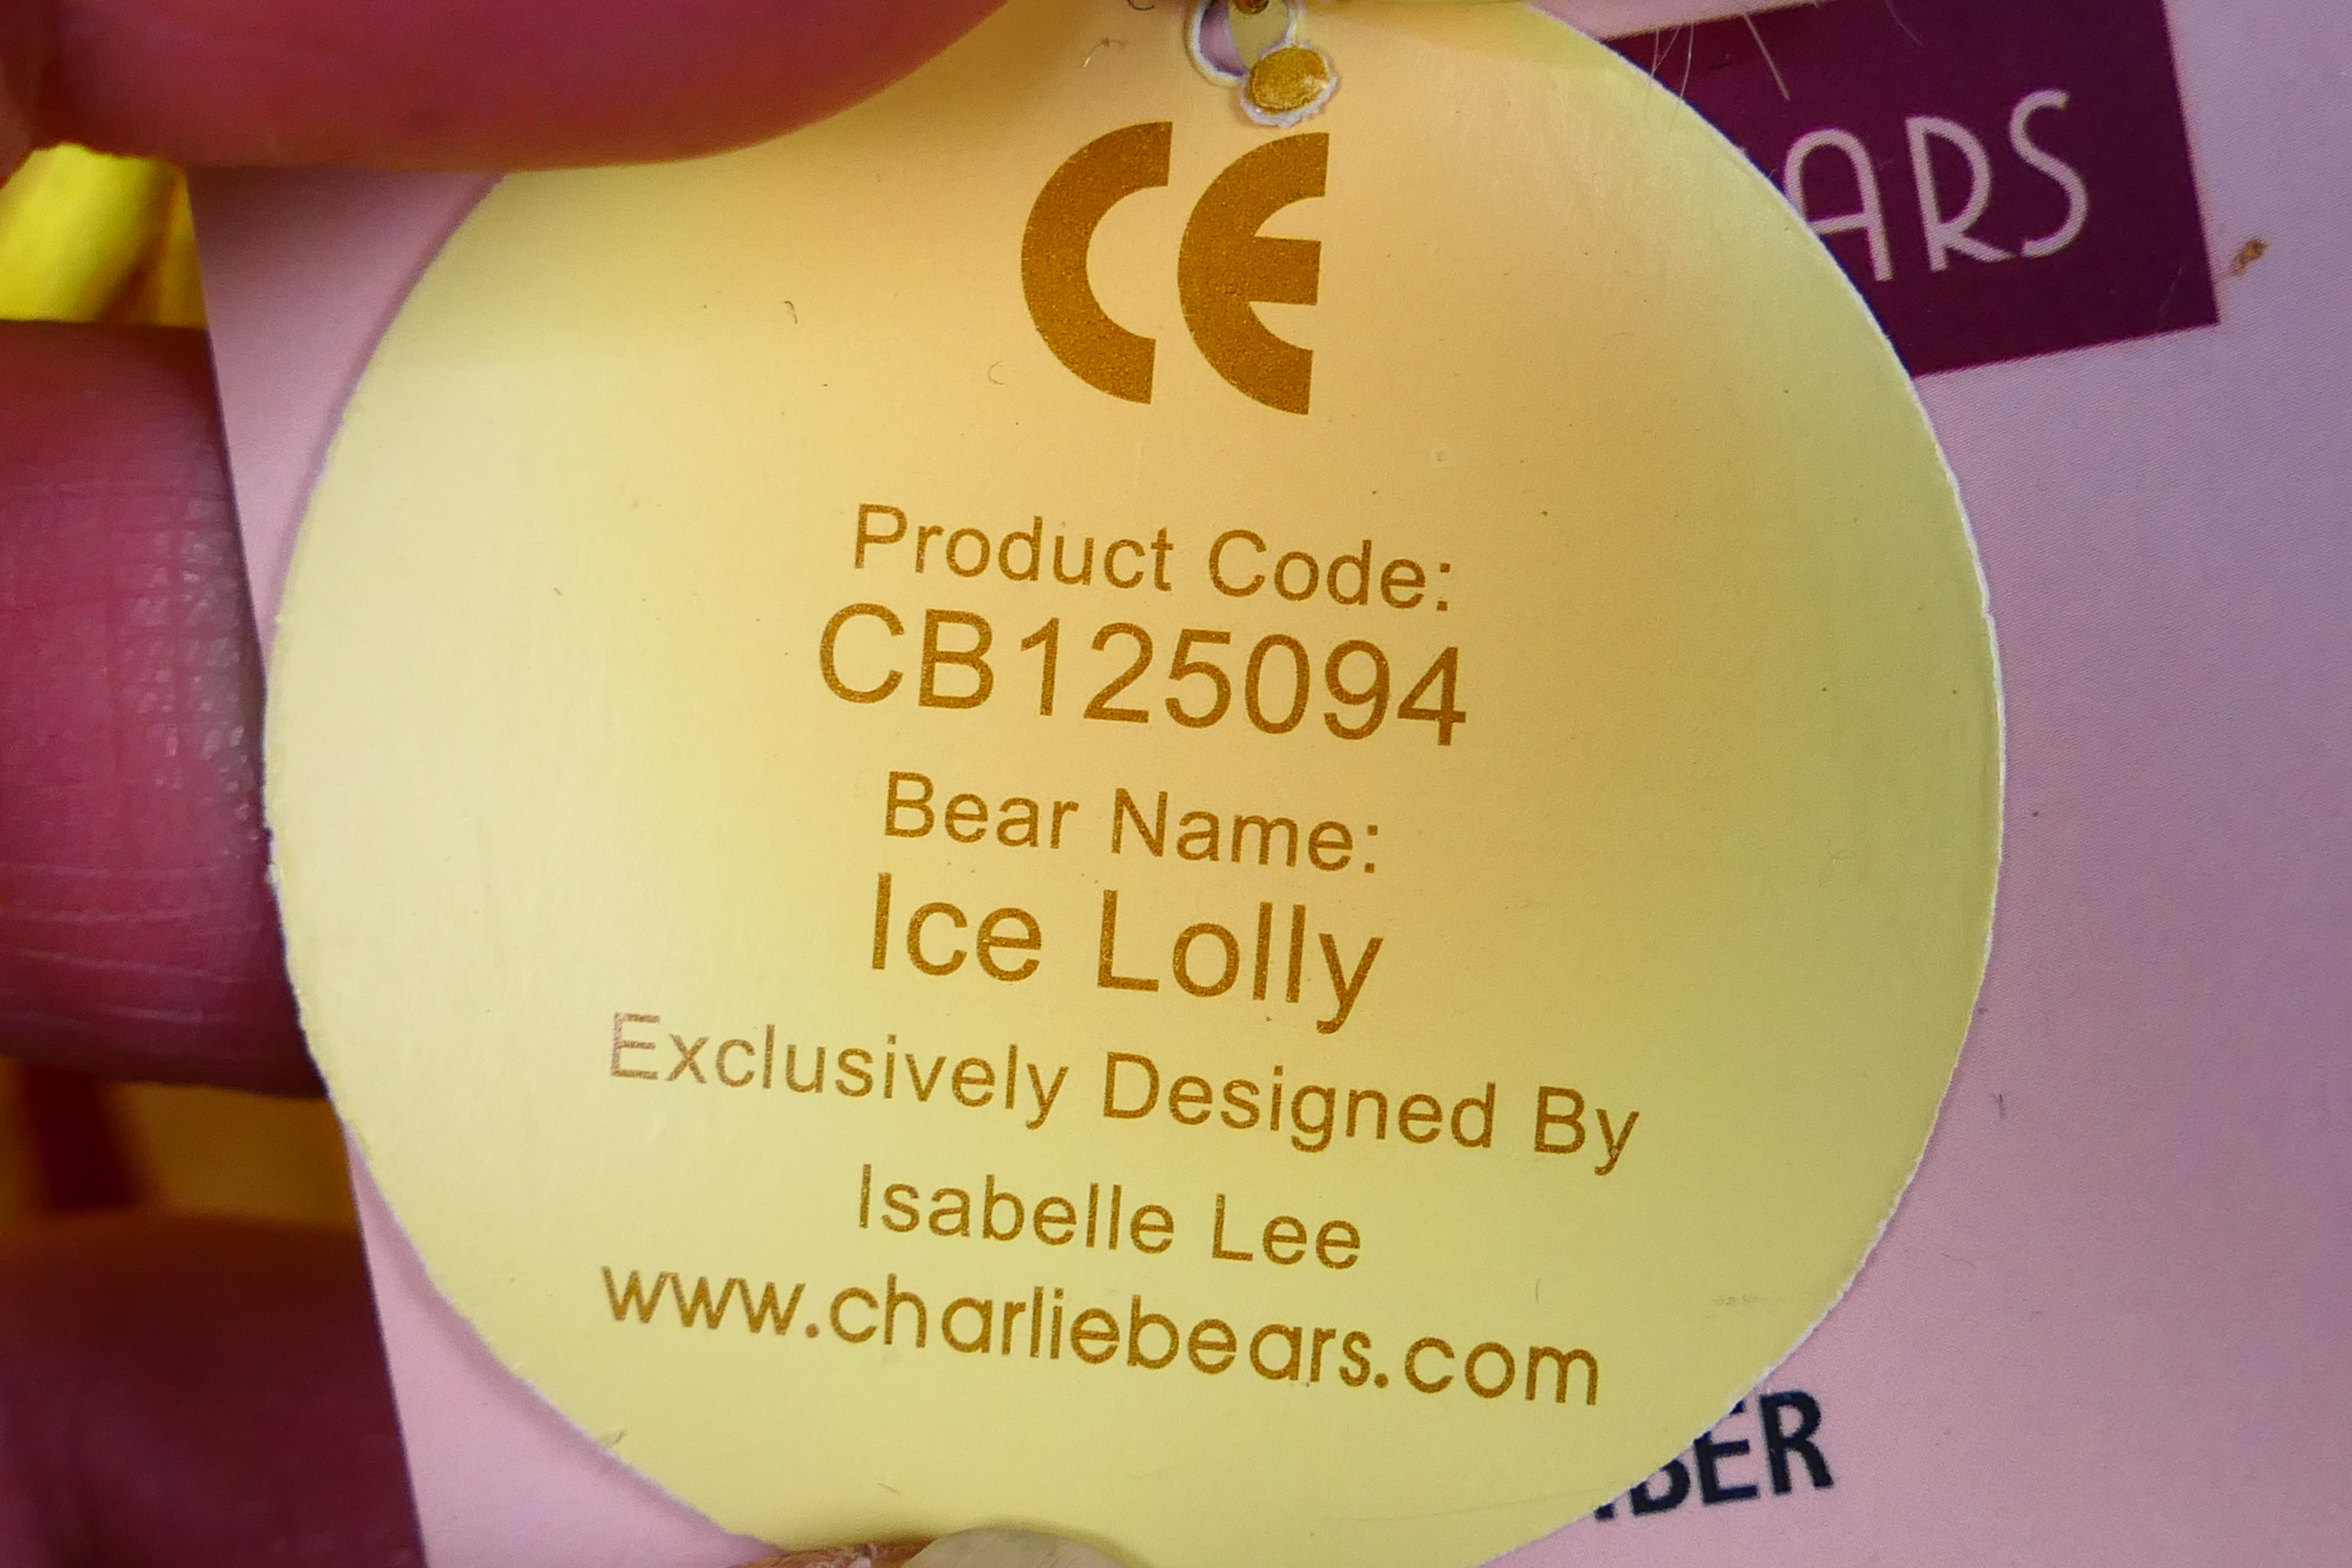 Charlie Bear - Plush - A Charlie Bear Collectors Plush Named Ice Lolly (#CB125094) 38cm, - Image 5 of 5